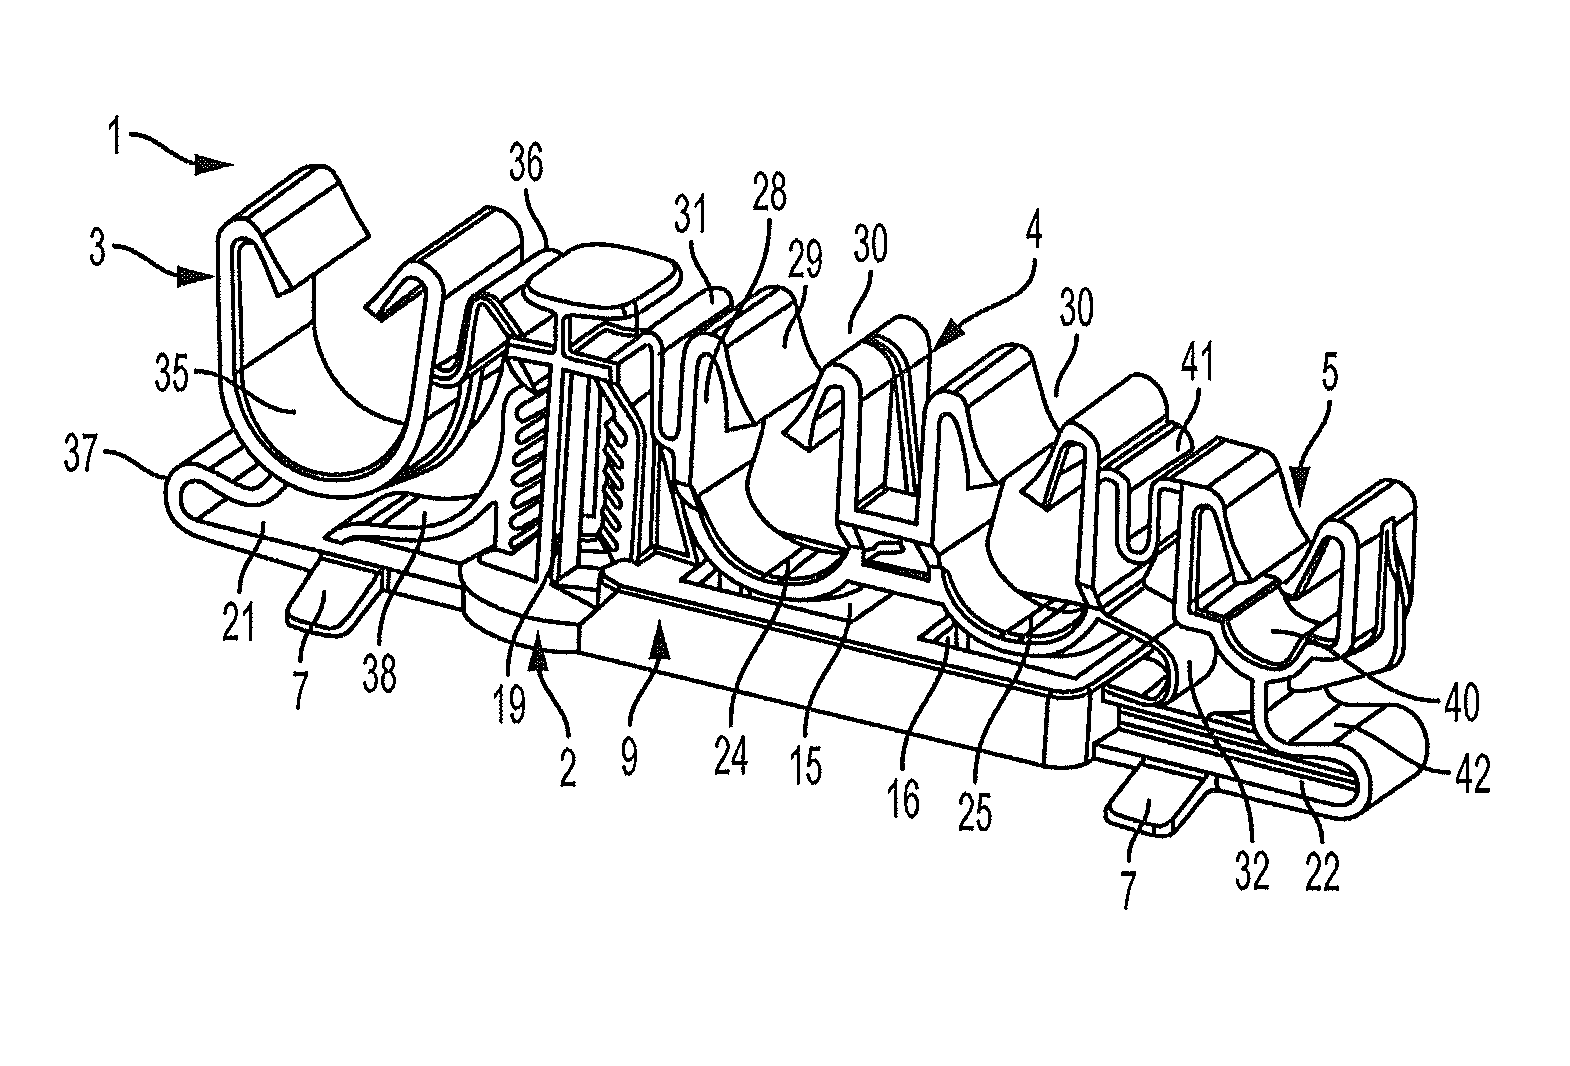 Plastic holder for Anti-vibration fastening an elongated object